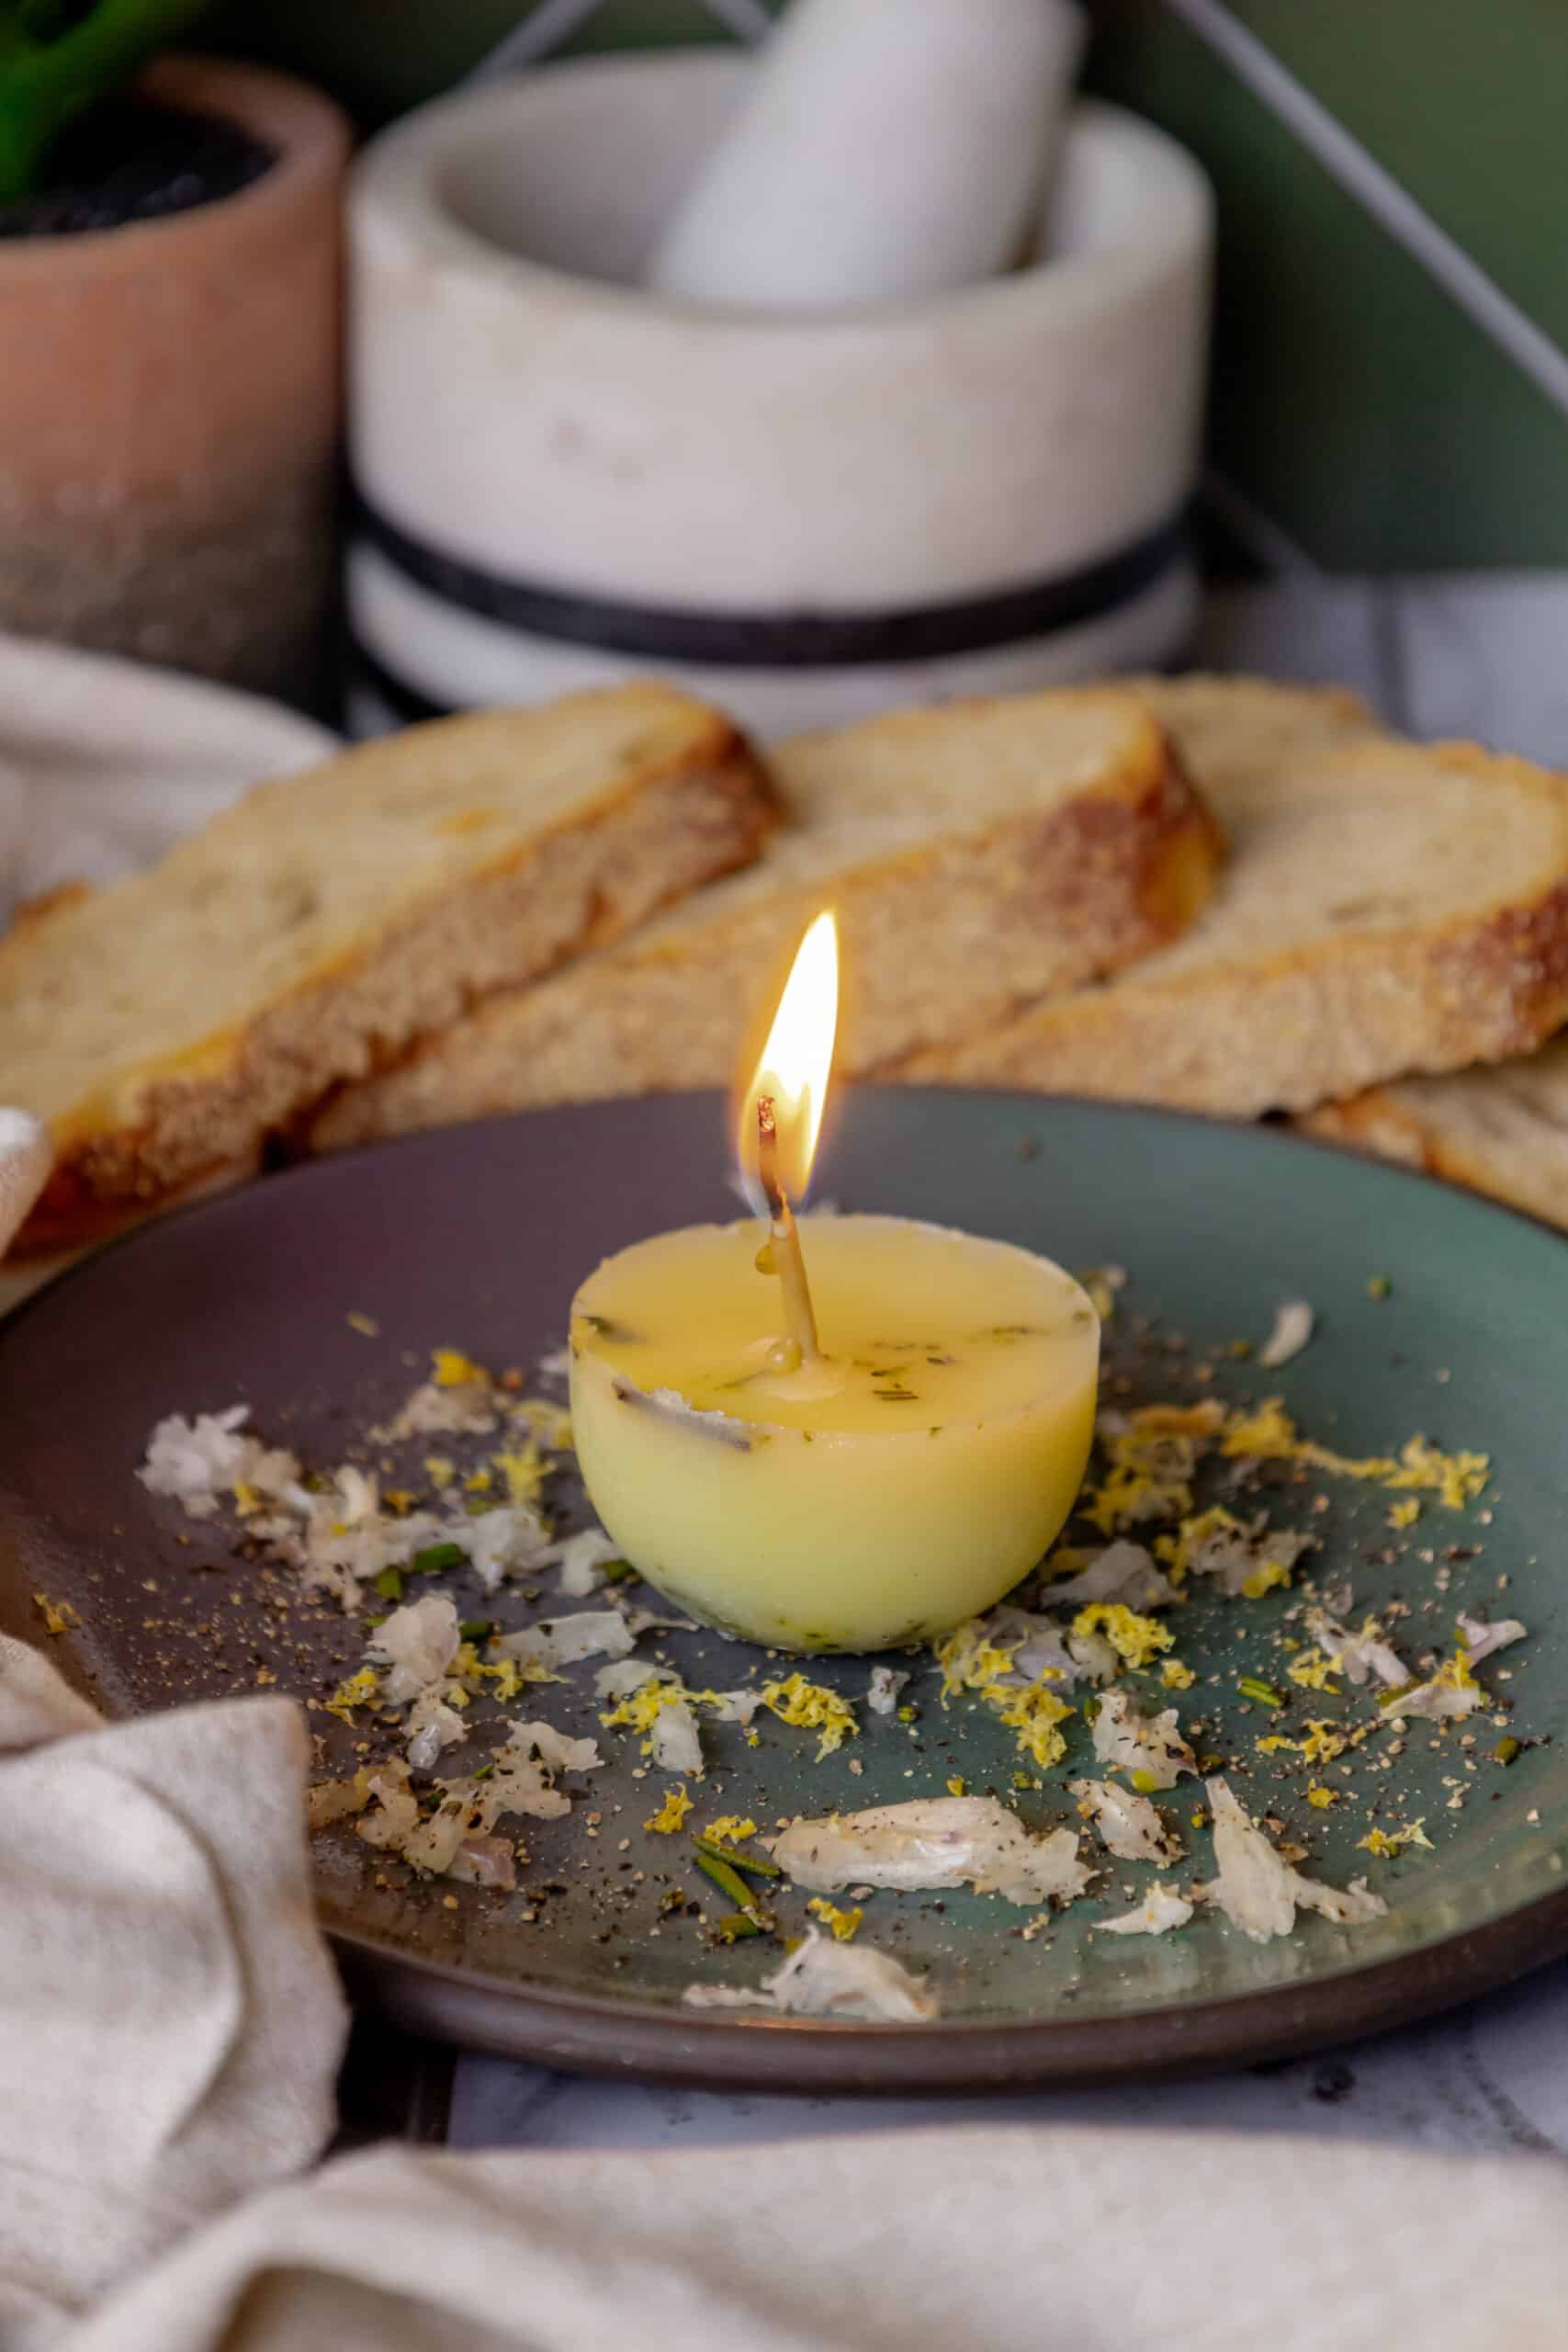 In this scene, a tallow candle is sitting on a plate next to some bread.